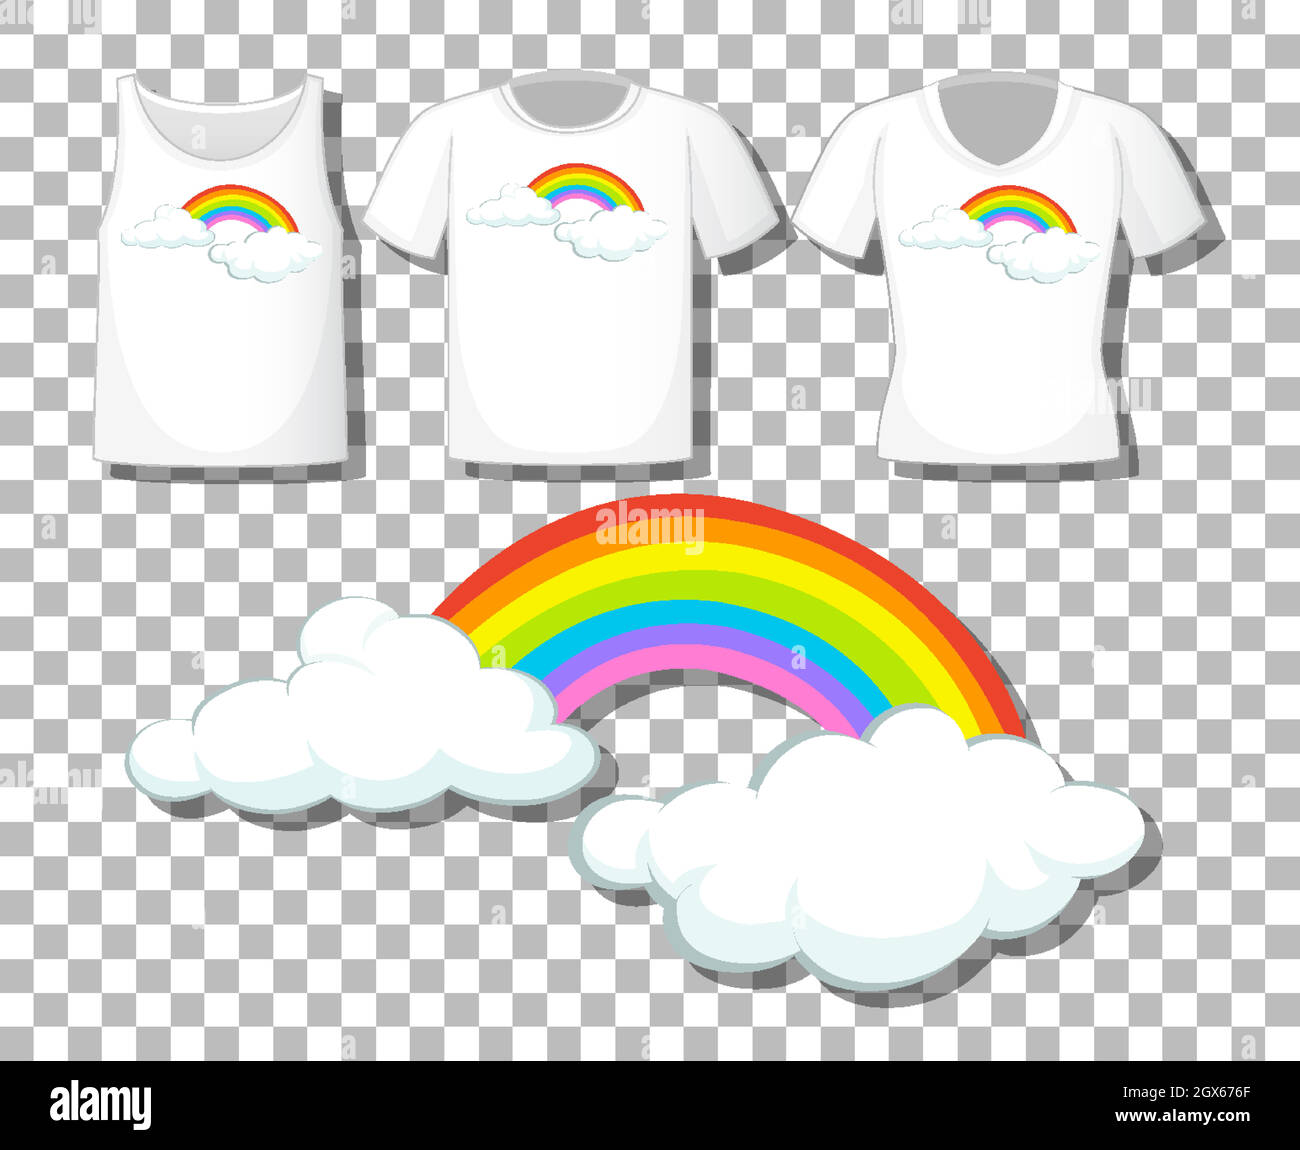 Rainbow with set of different shirts isolated on transparent background Stock Vector